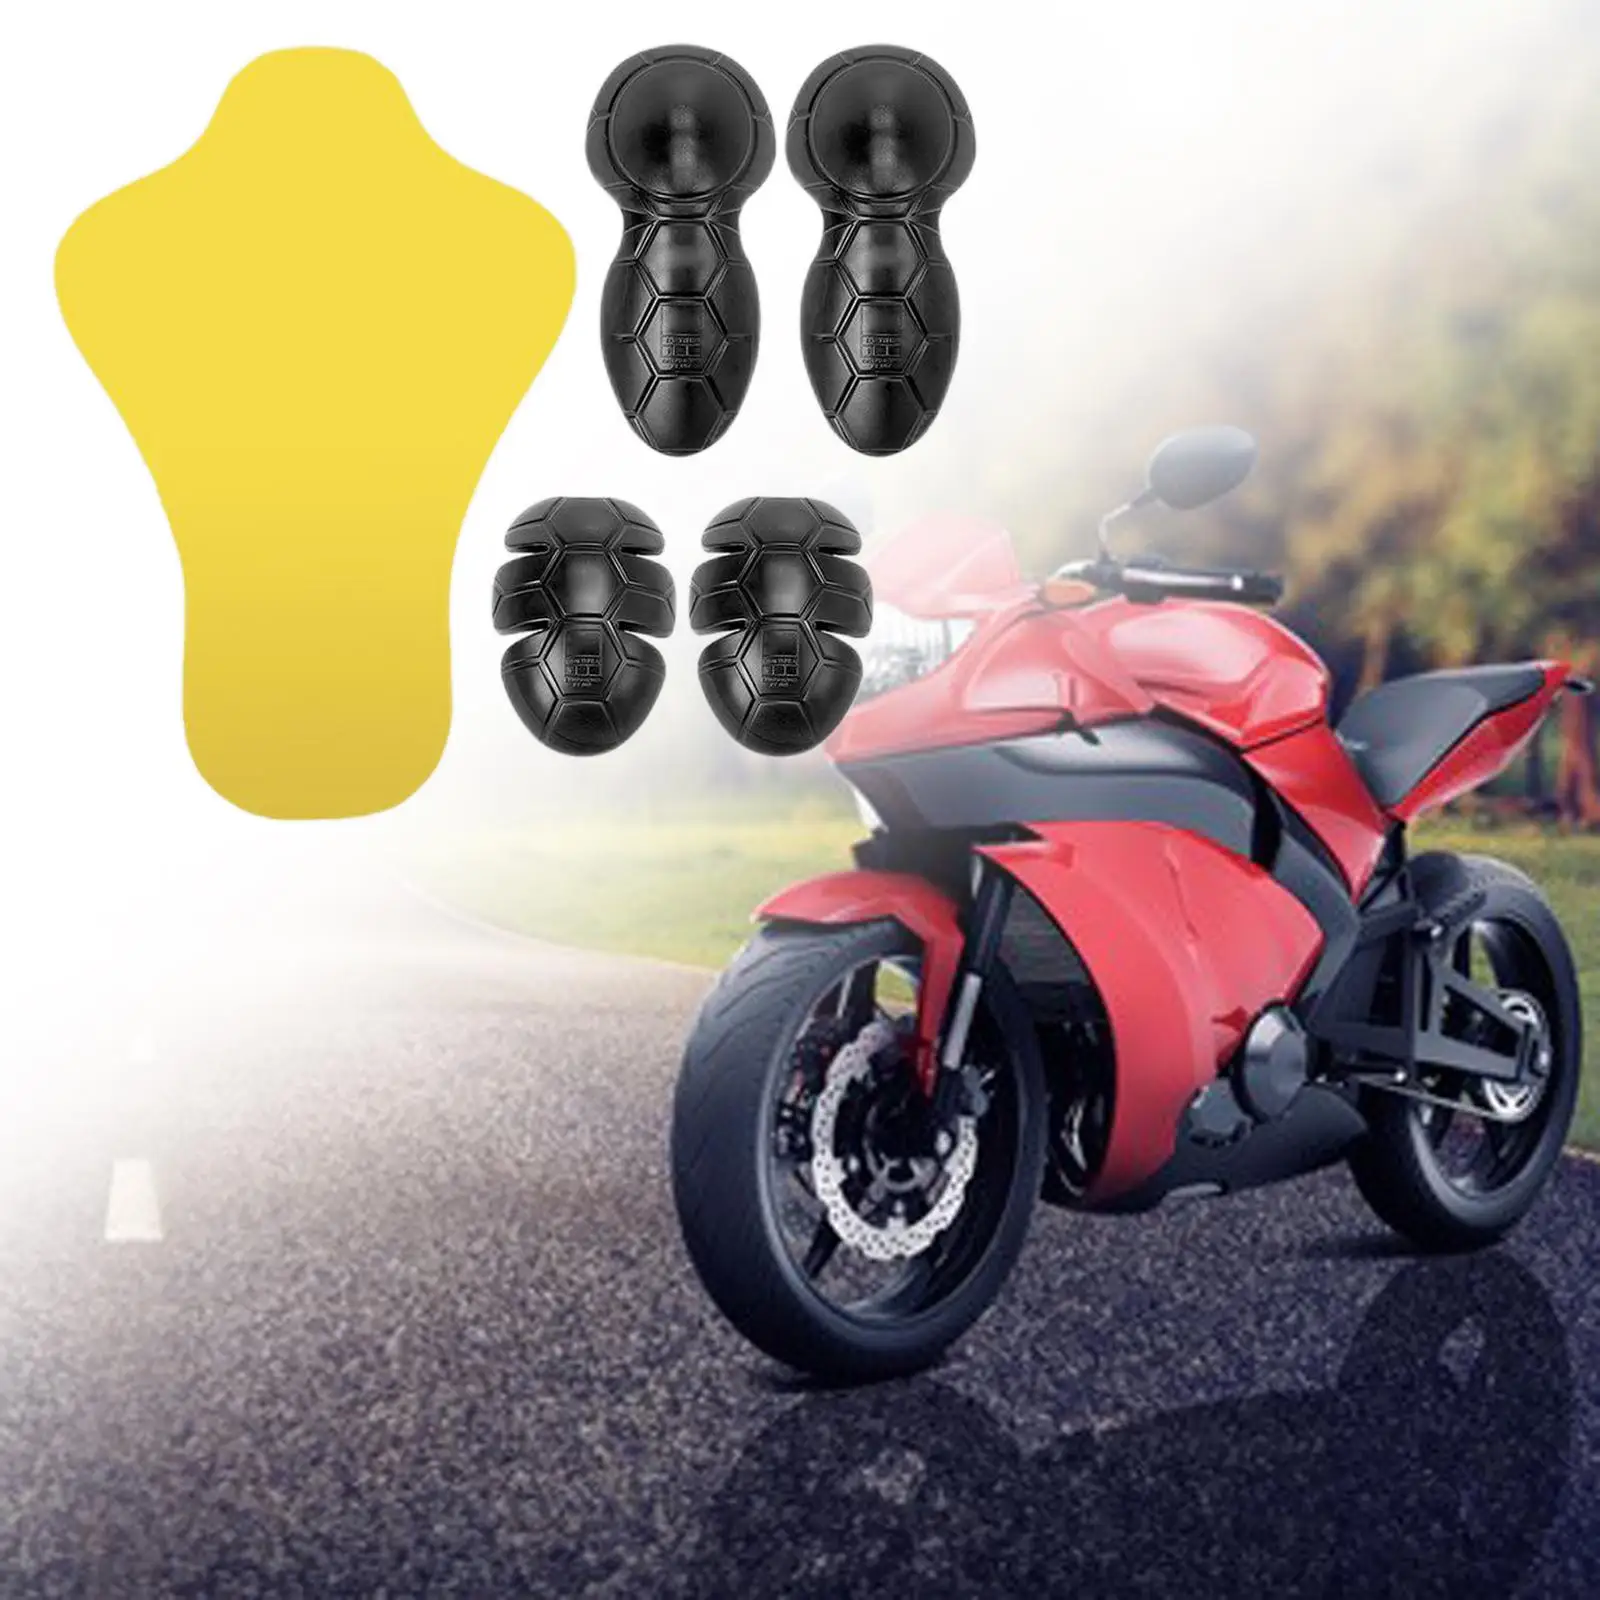 5 Pieces Motorcycle Jacket Insert Armor Protectors Set Back Chest Guard